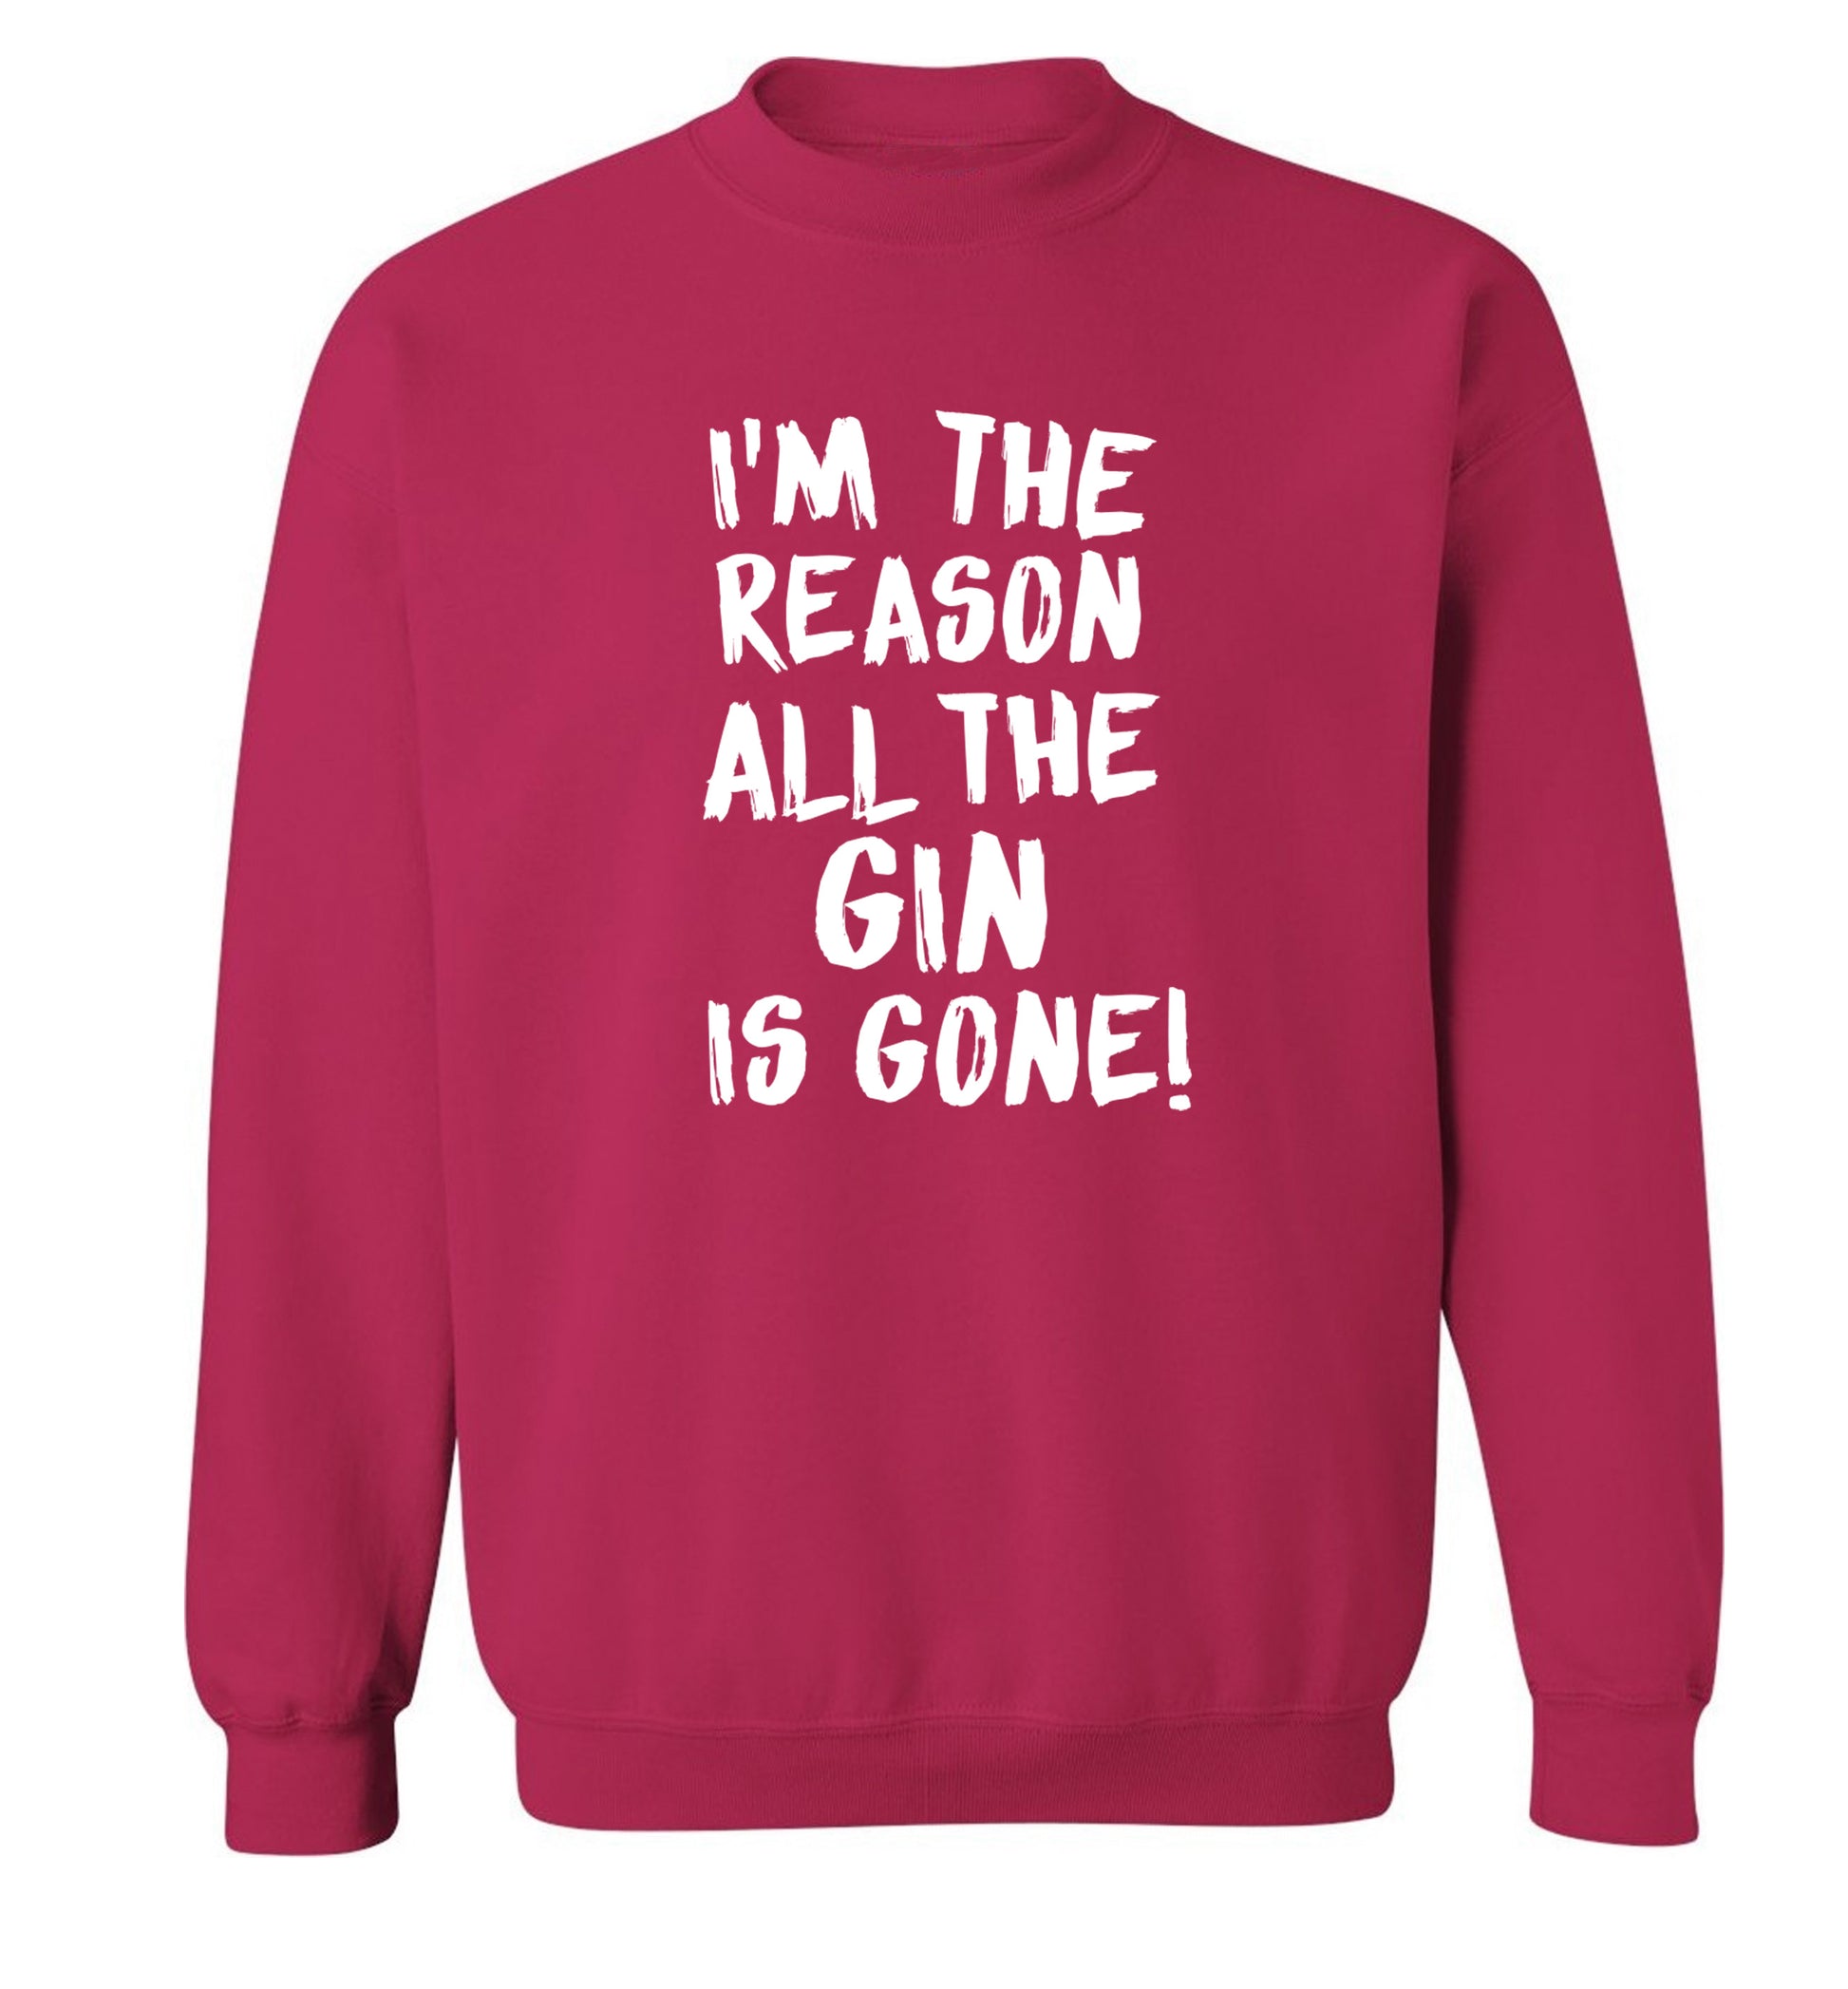 I'm the reason all the gin is gone Adult's unisex pink Sweater 2XL